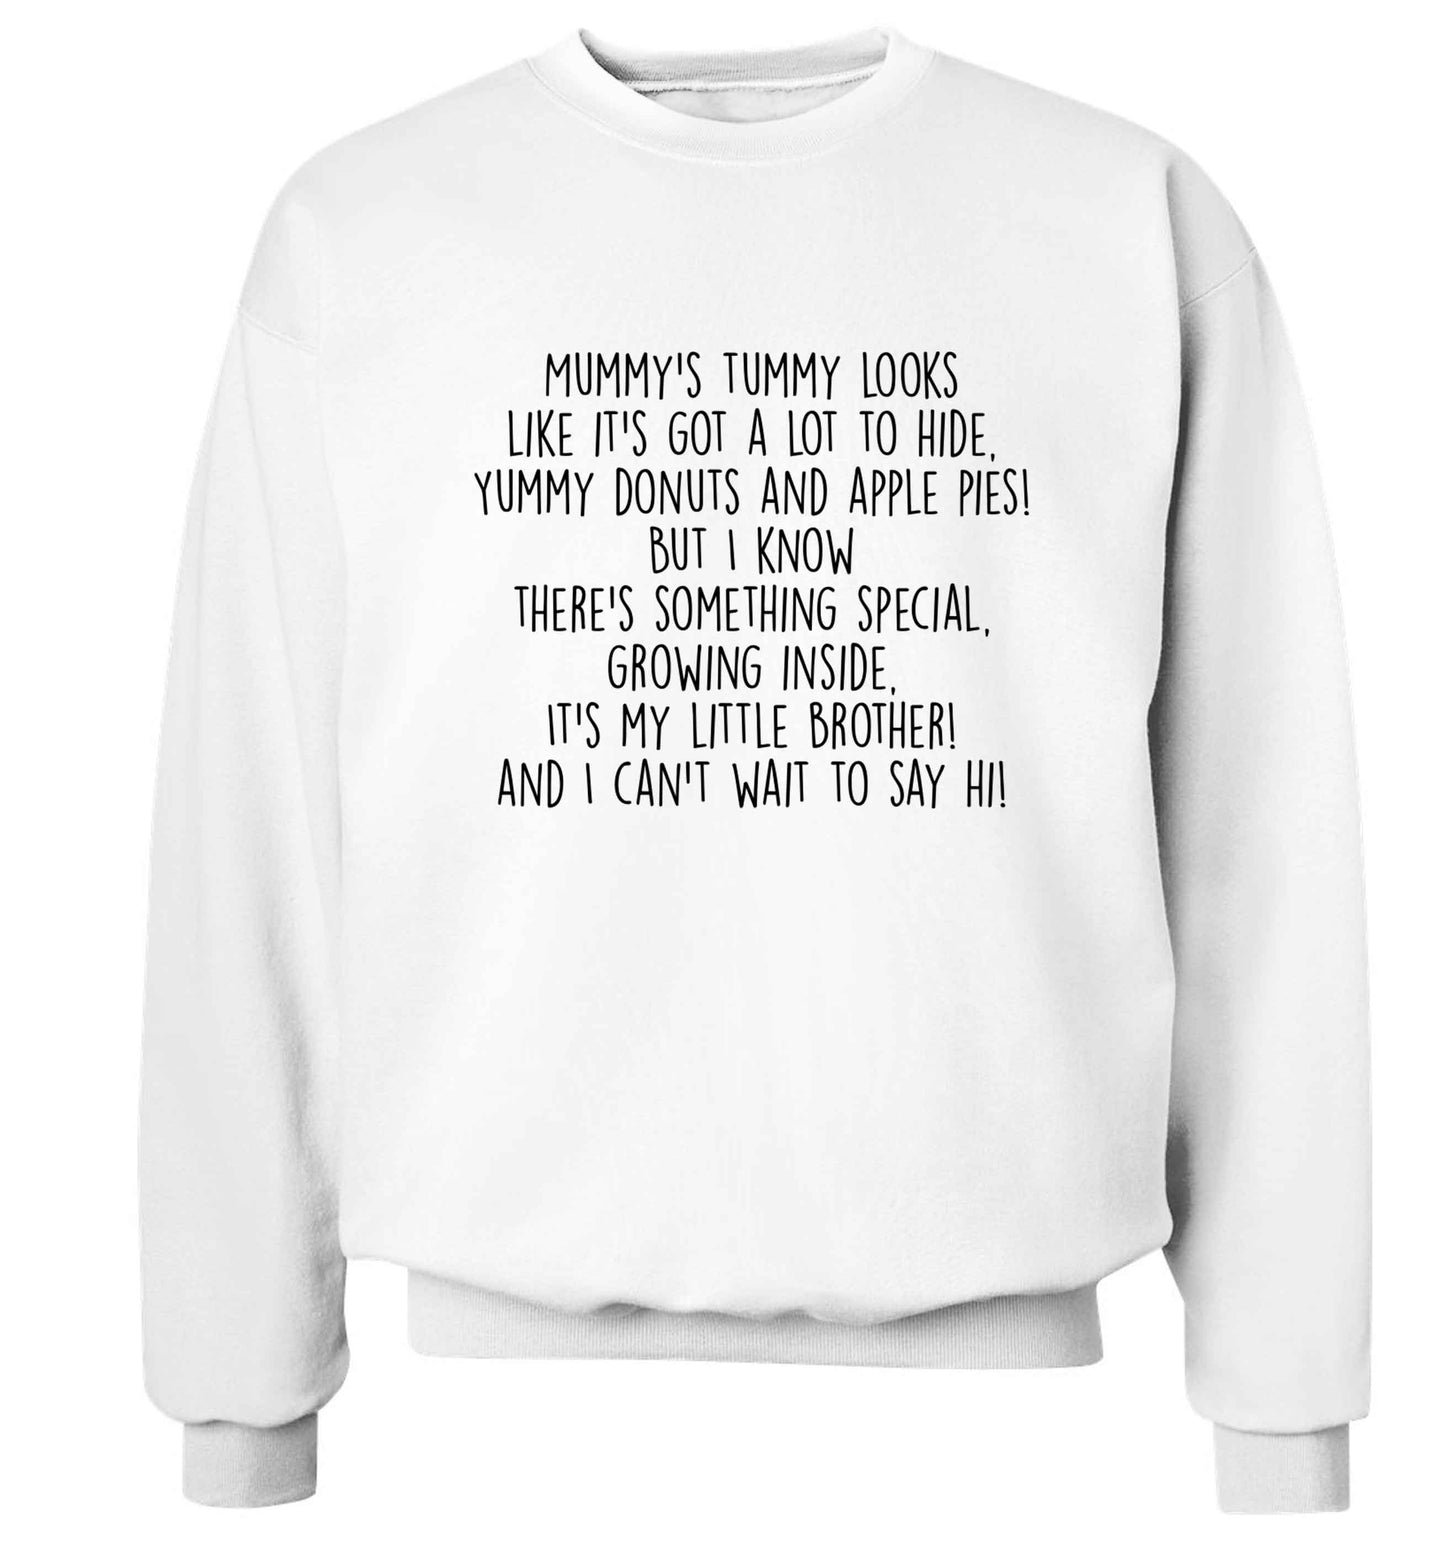 Something special growing inside it's my little brother I can't wait to say hi! Adult's unisex white Sweater 2XL